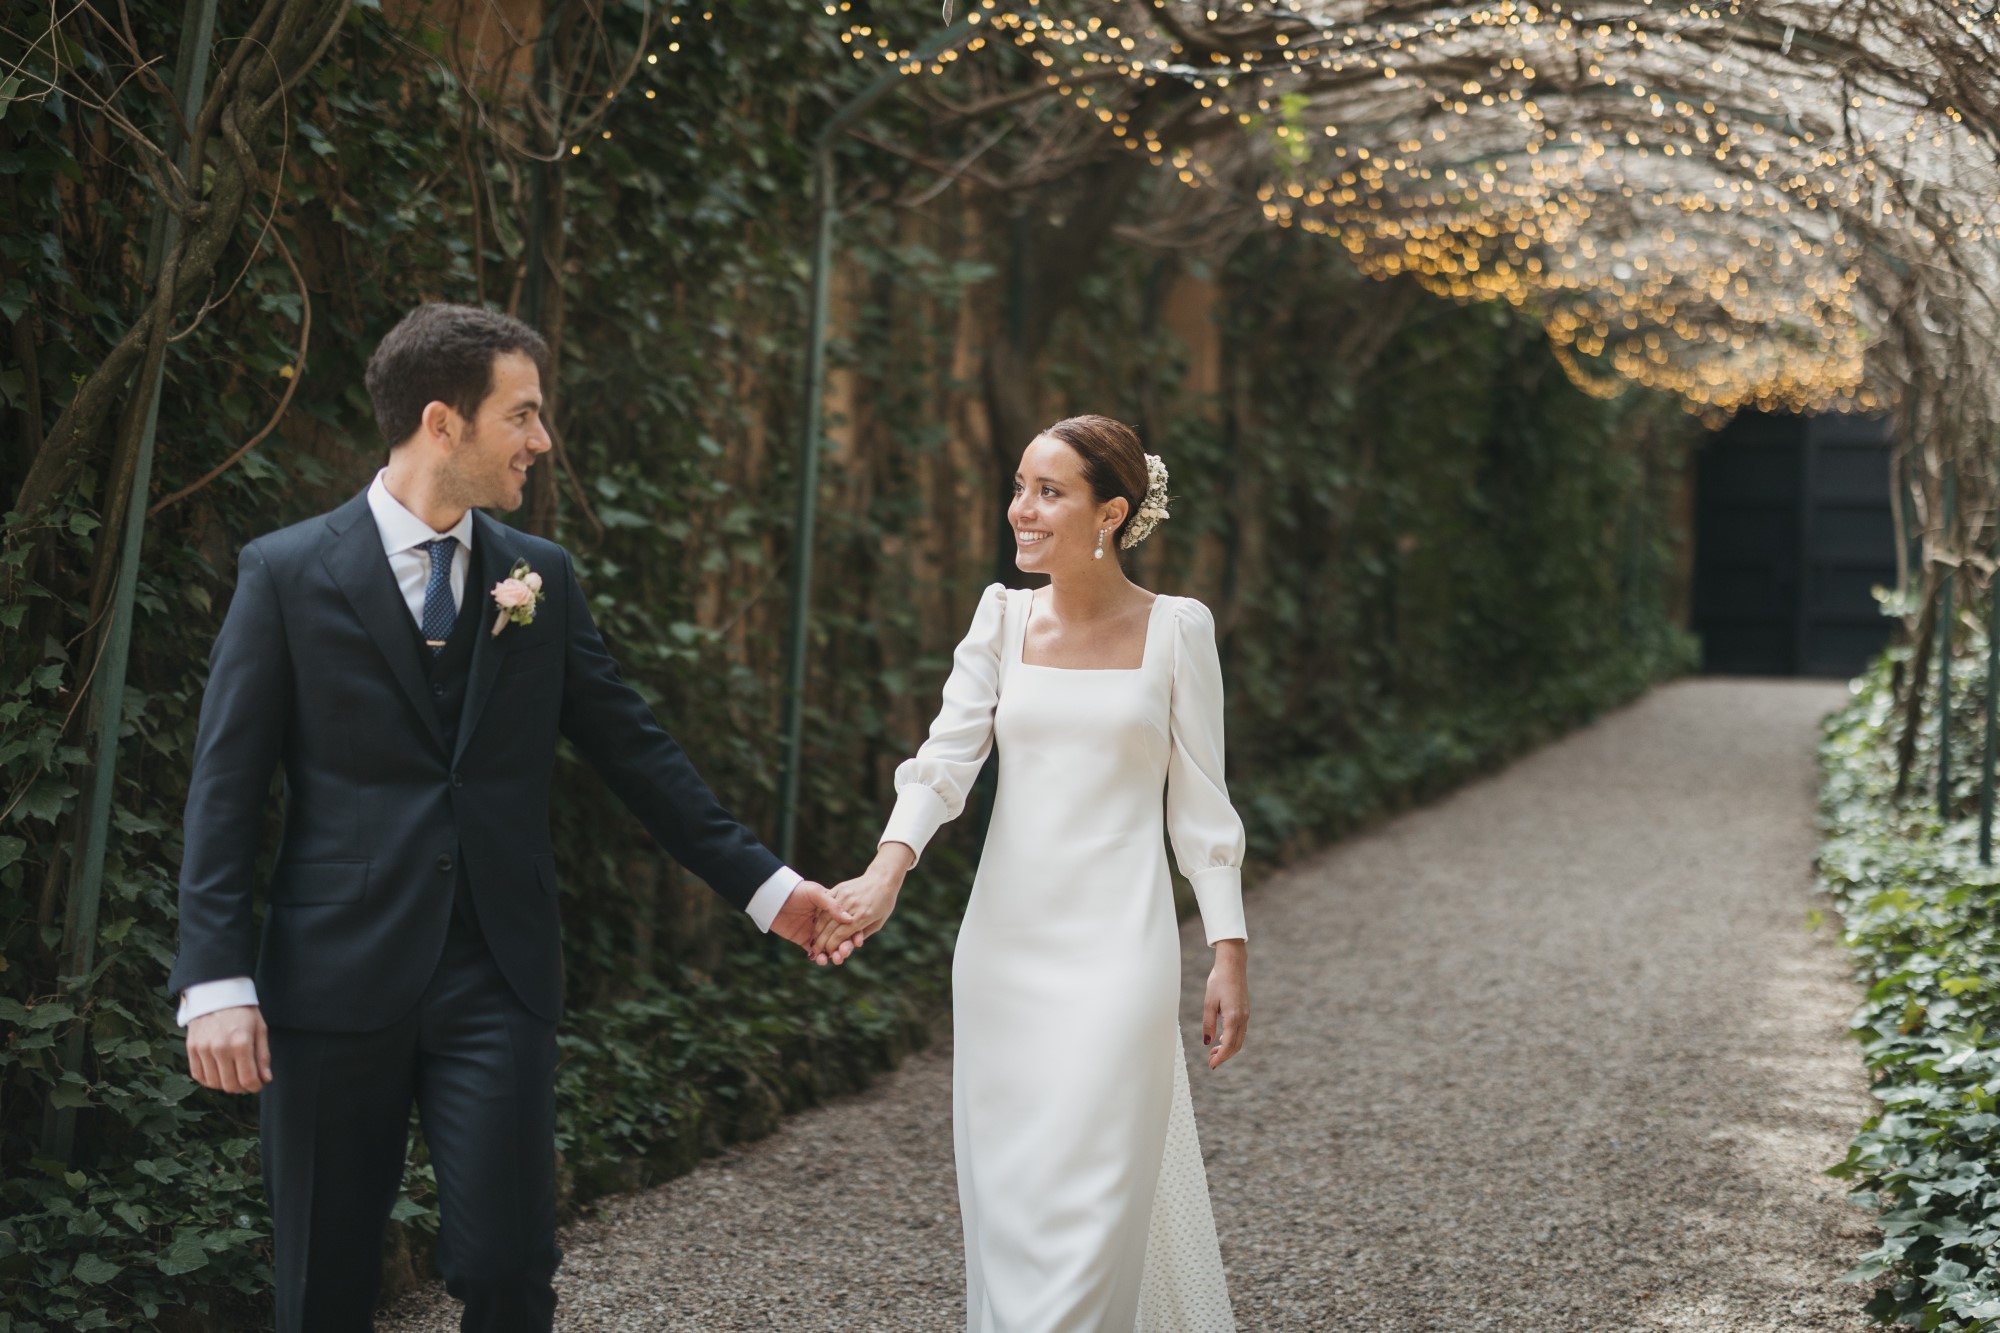 Bridal couple at wedding holding hands and walking together under floral archway with string lights